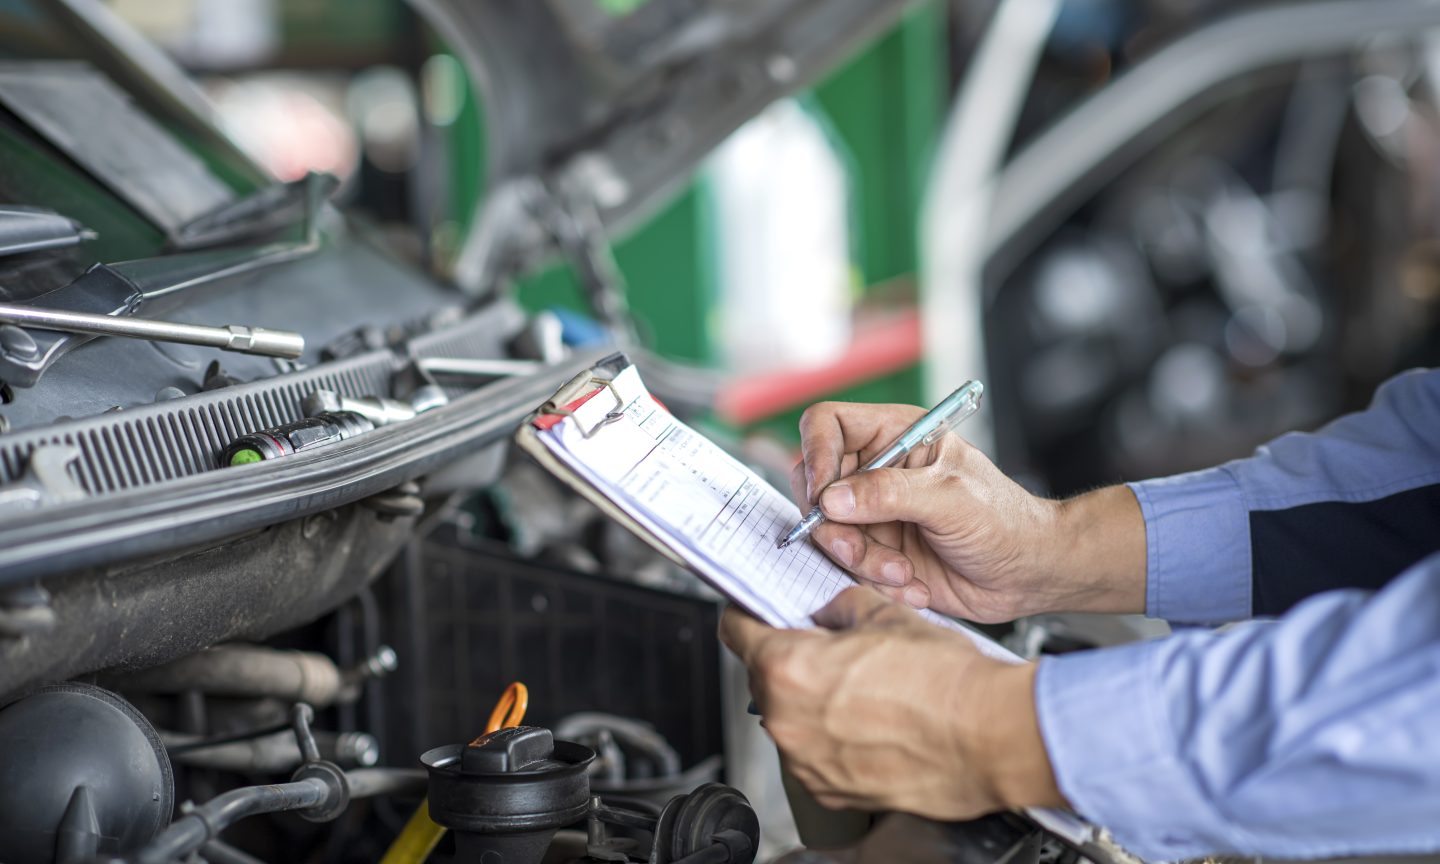 Carfax vs. AutoCheck: Which Car Historical past Report is Higher? – NerdWallet